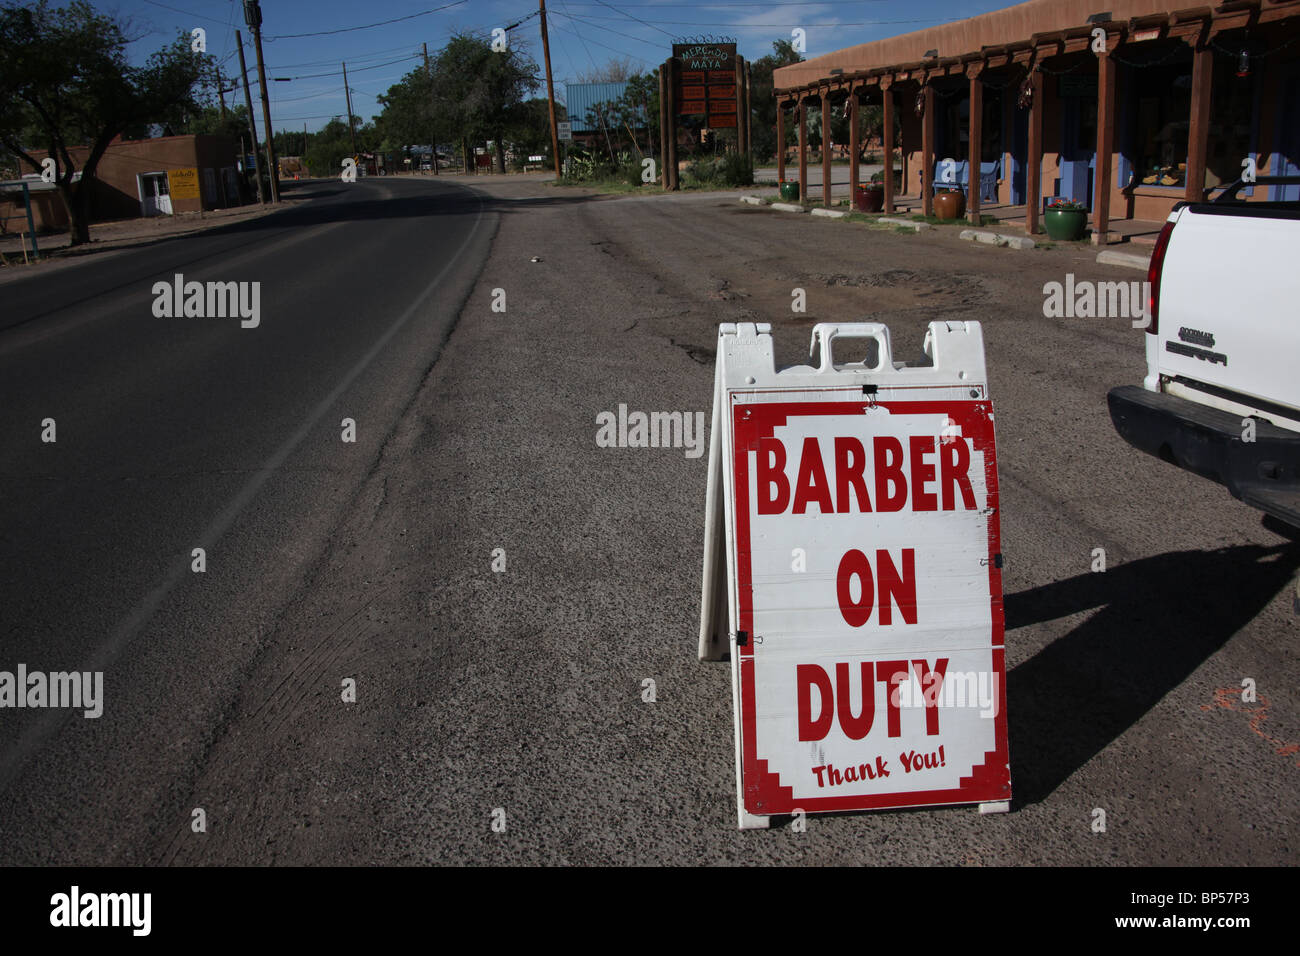 Barber on duty sign in parking lot of strip mall in Corrales, Sandoval County, New Mexico, June 10, 2010 Stock Photo